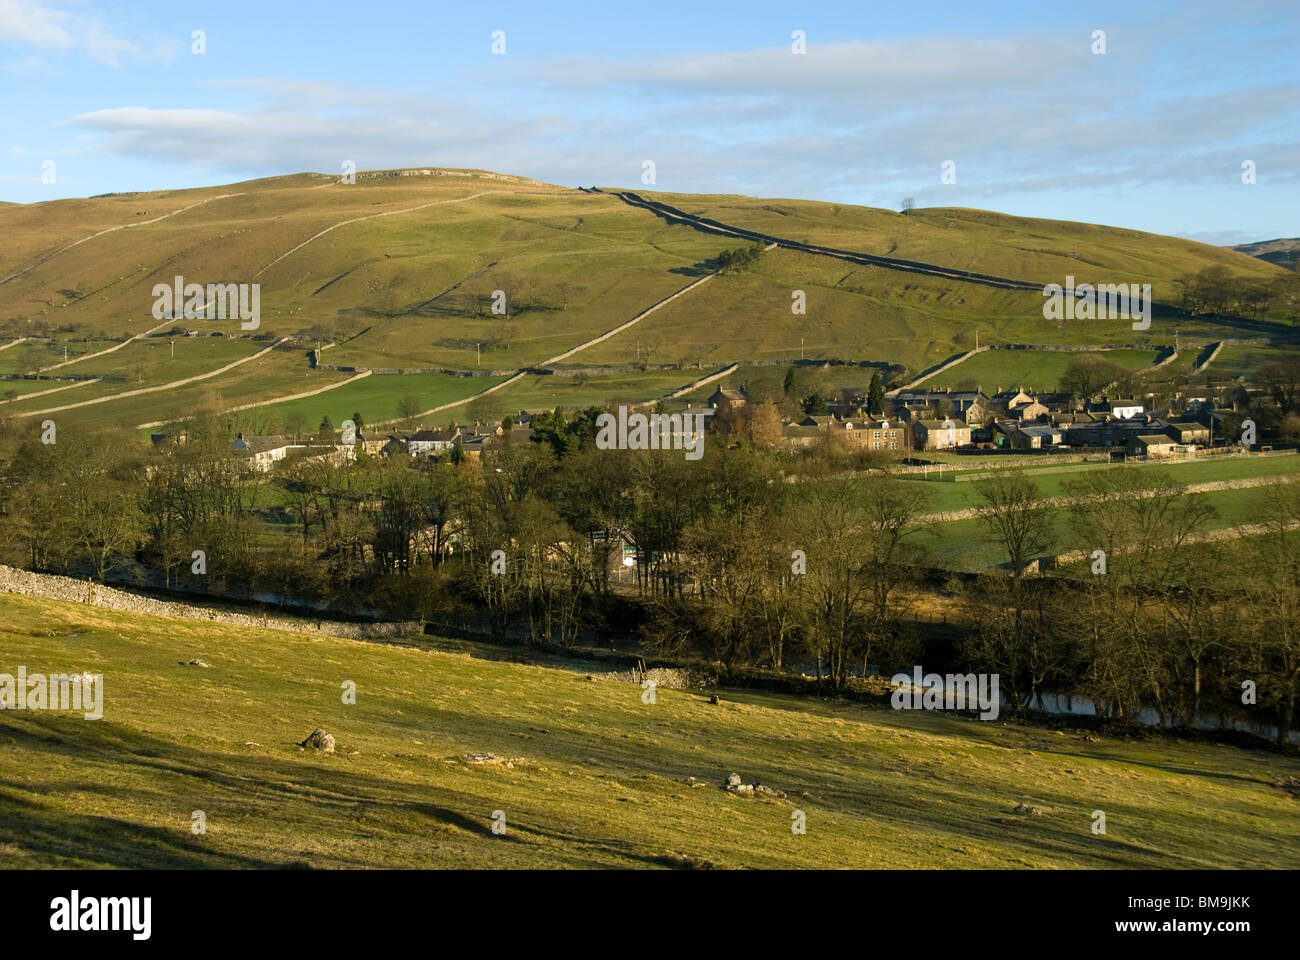 The village of Kettlewell in Wharfedale, Yorkshire Dales National Park, England, UK. Stock Photo